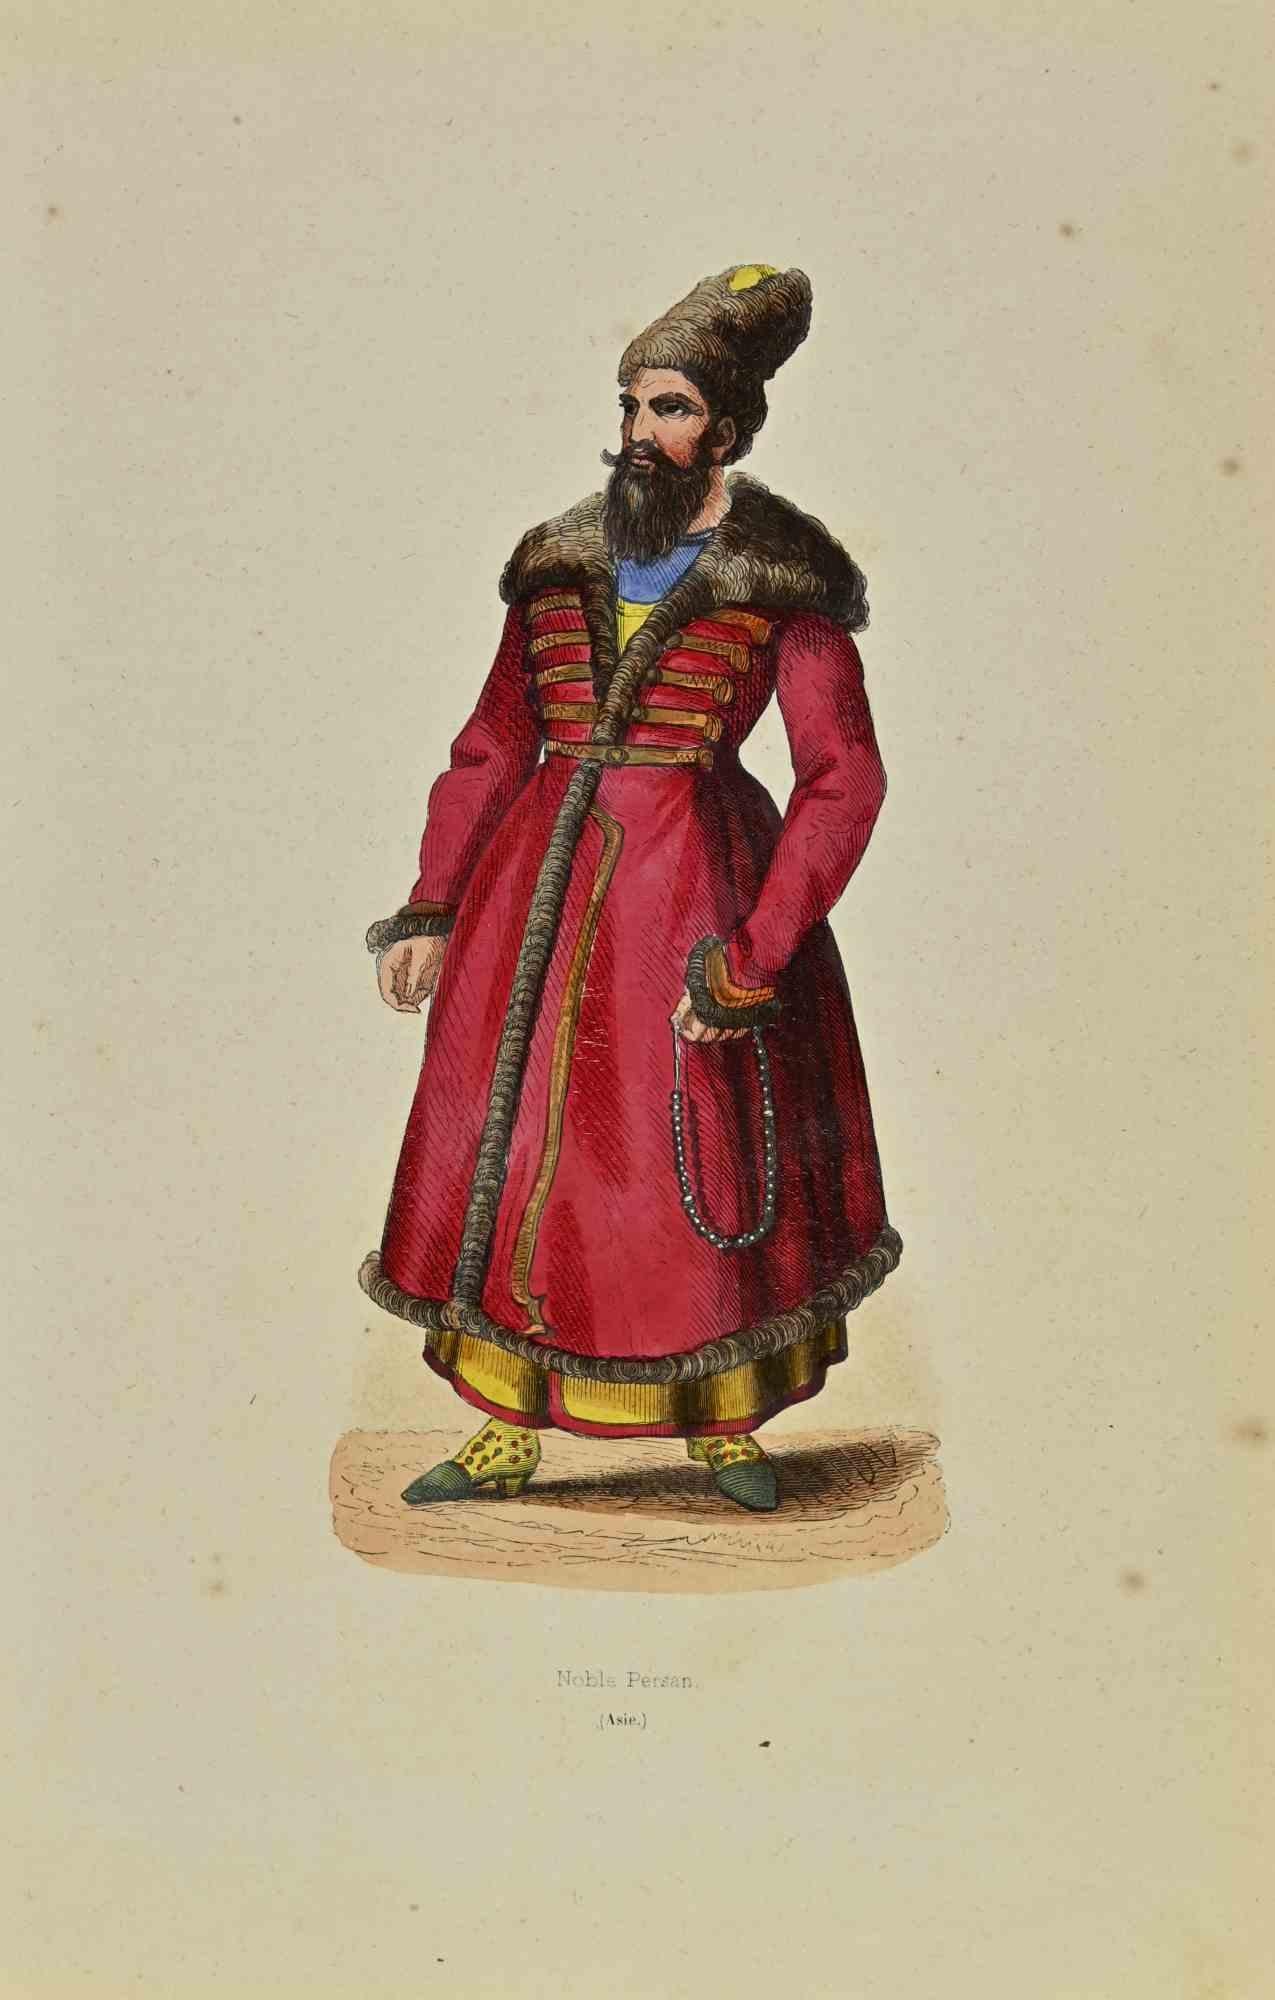 Persian Nobleman is a lithograph made by Auguste Wahlen in 1844.

Hand colored.

Good condition.

At the center of the artwork is the original title "Noble Persan".

The work is part of Suite Moeurs, usages et costumes de tous les peuples du monde,